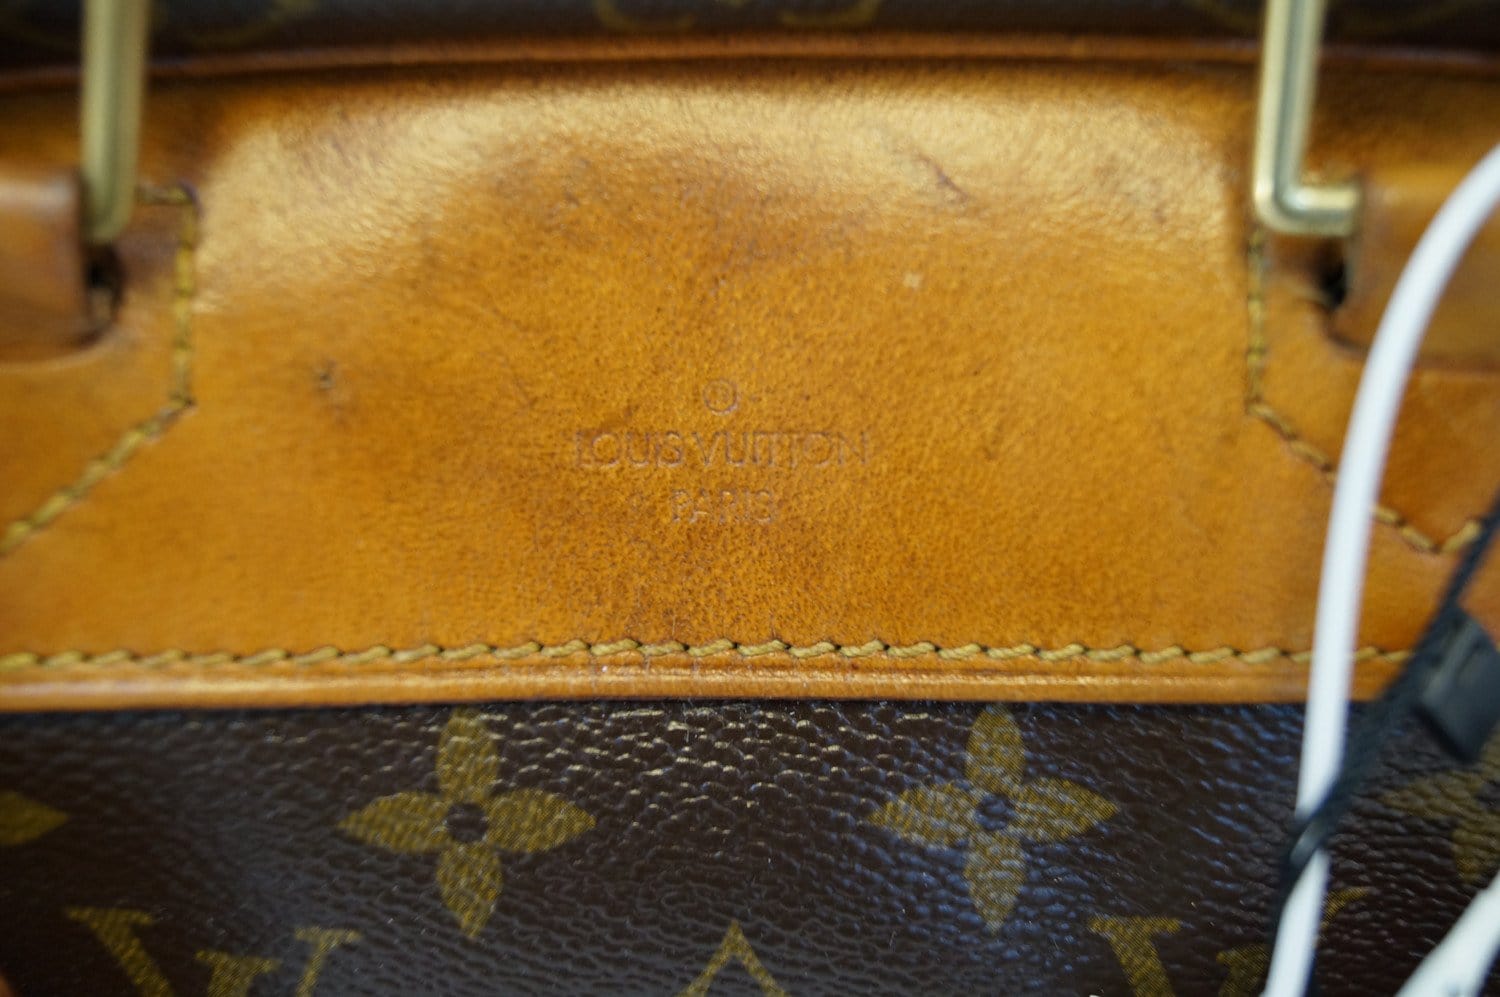 Deauville leather bag Louis Vuitton Other in Leather - 14510661